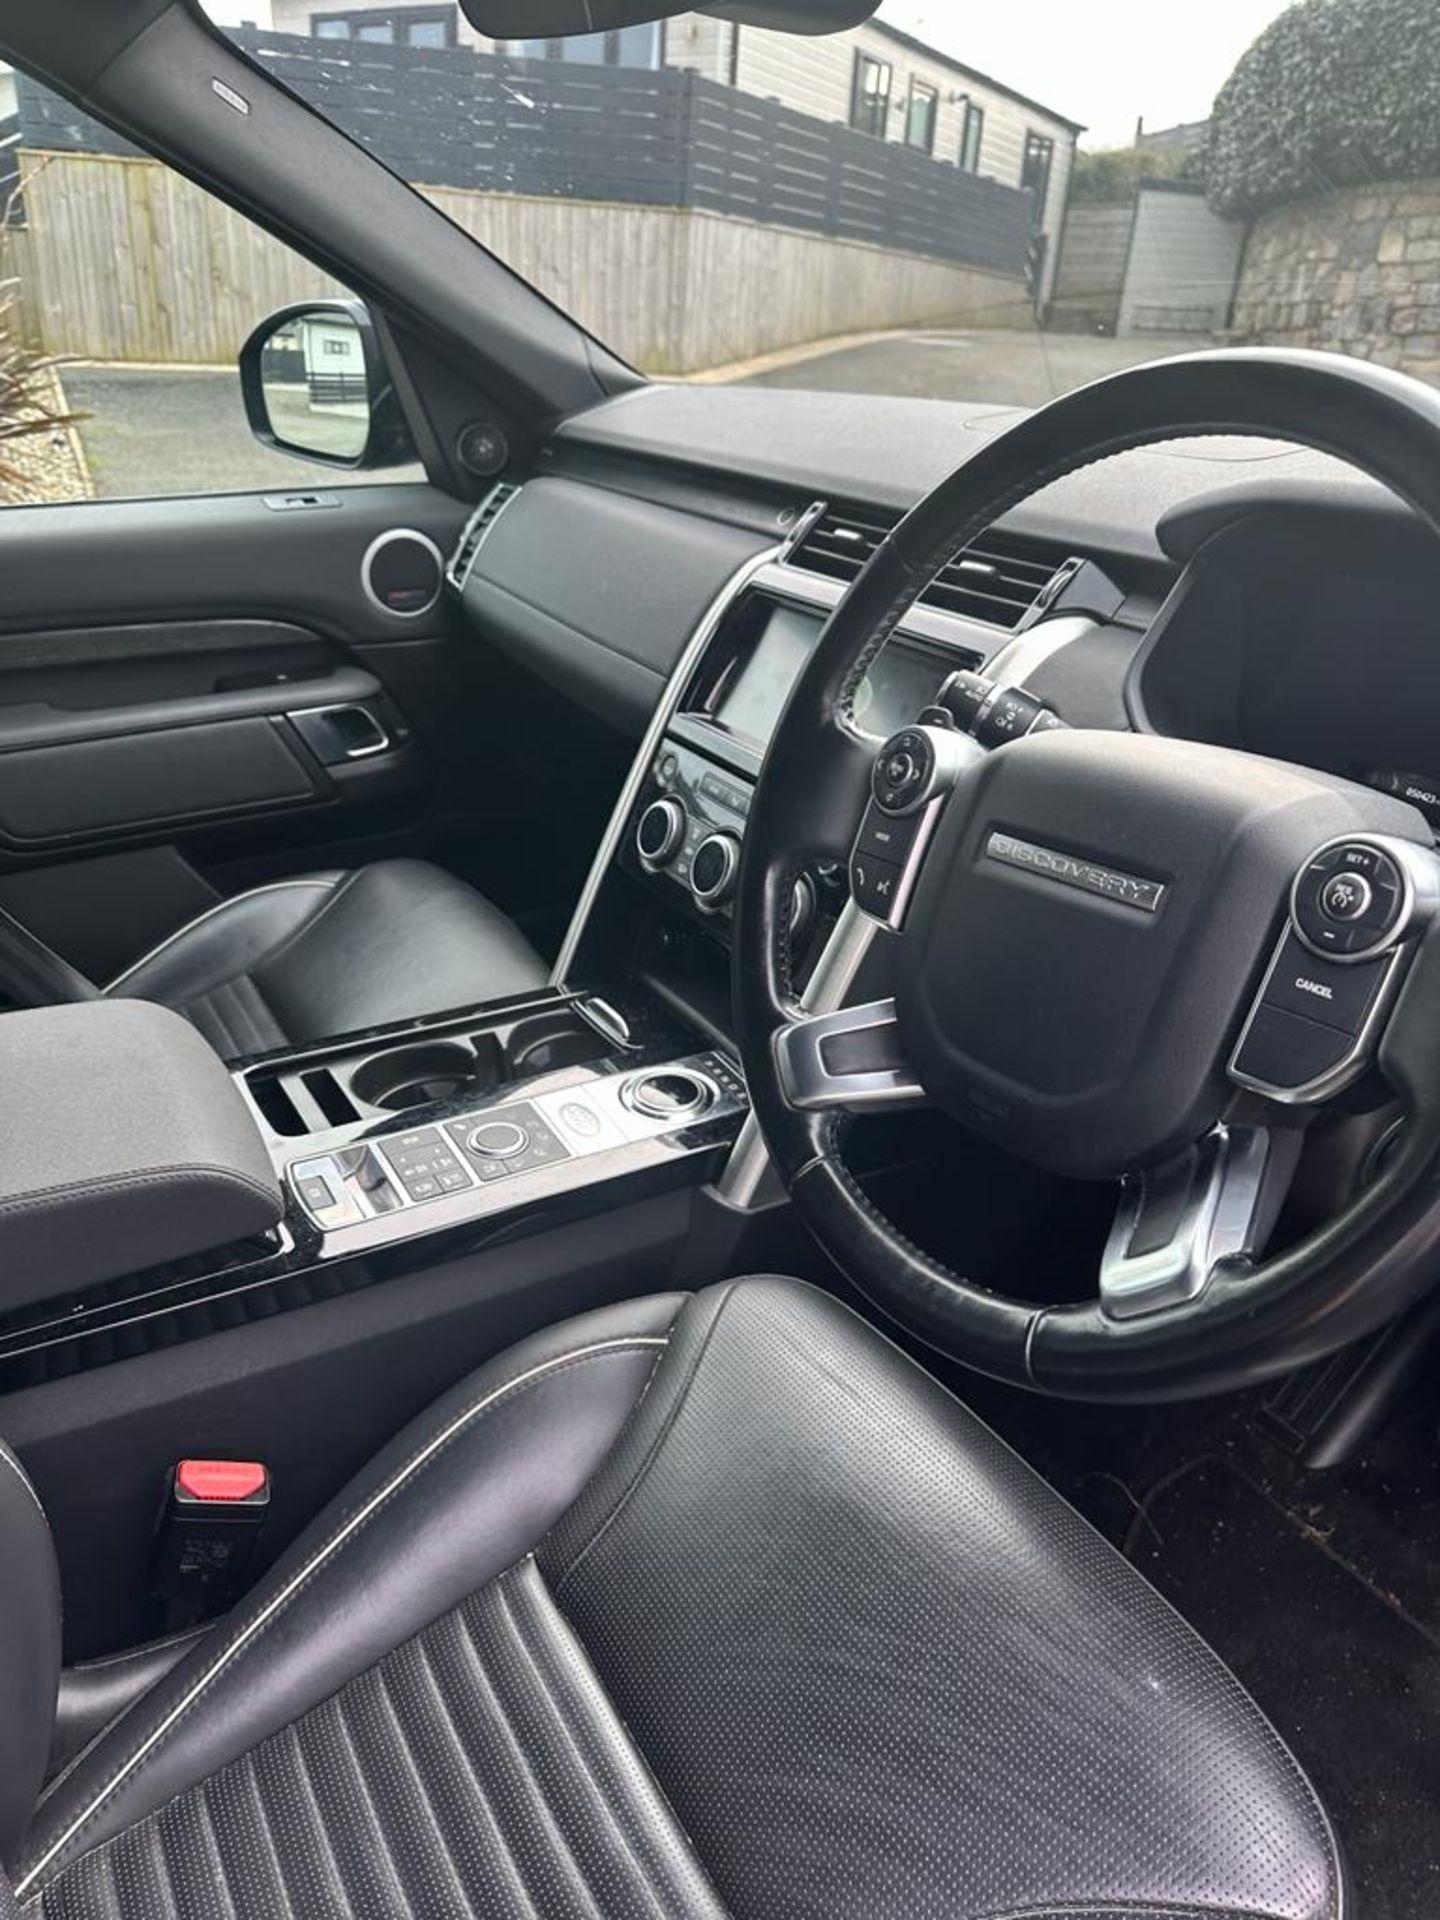 2018 LAND ROVER DISCOVERY HSE SD4 AUTO GREY SUV ESTATE *NO VAT* - Image 9 of 10